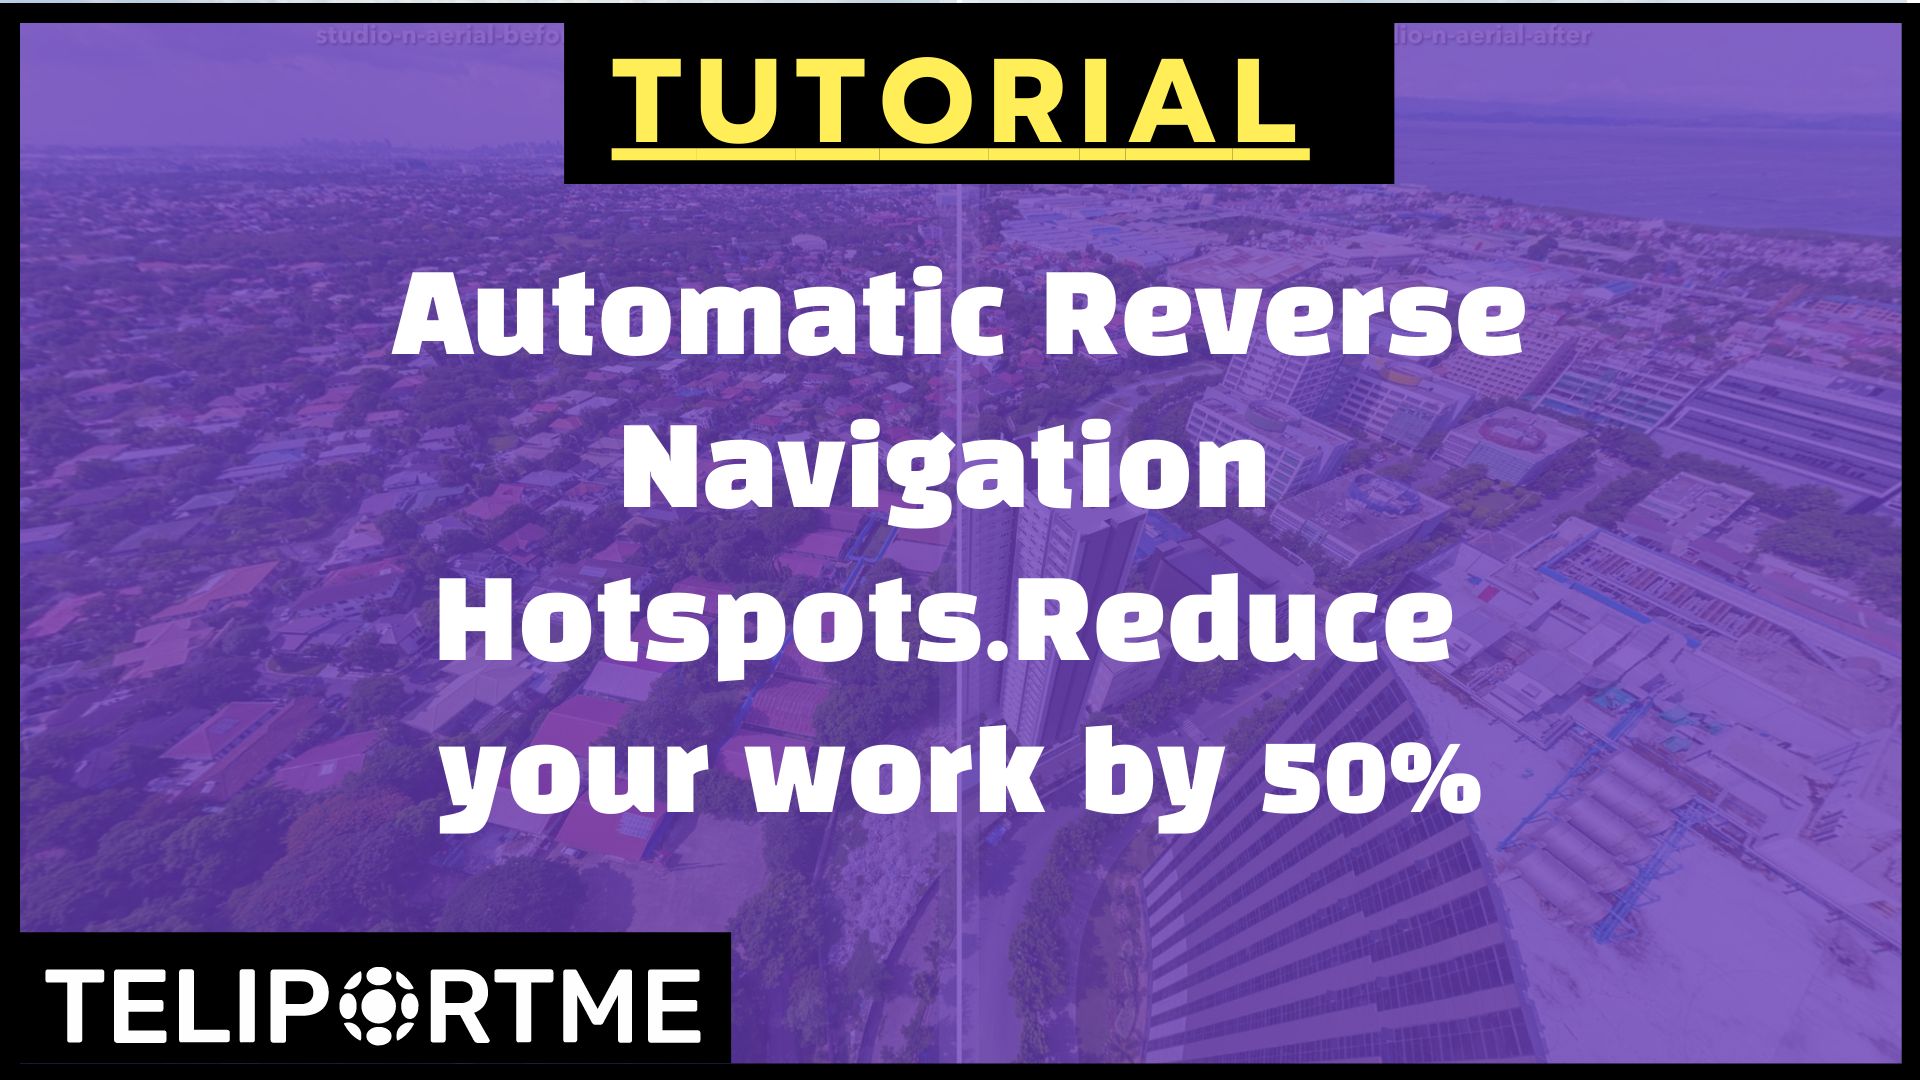 Automatically add Reverse Hotspots - 2X your efficiency